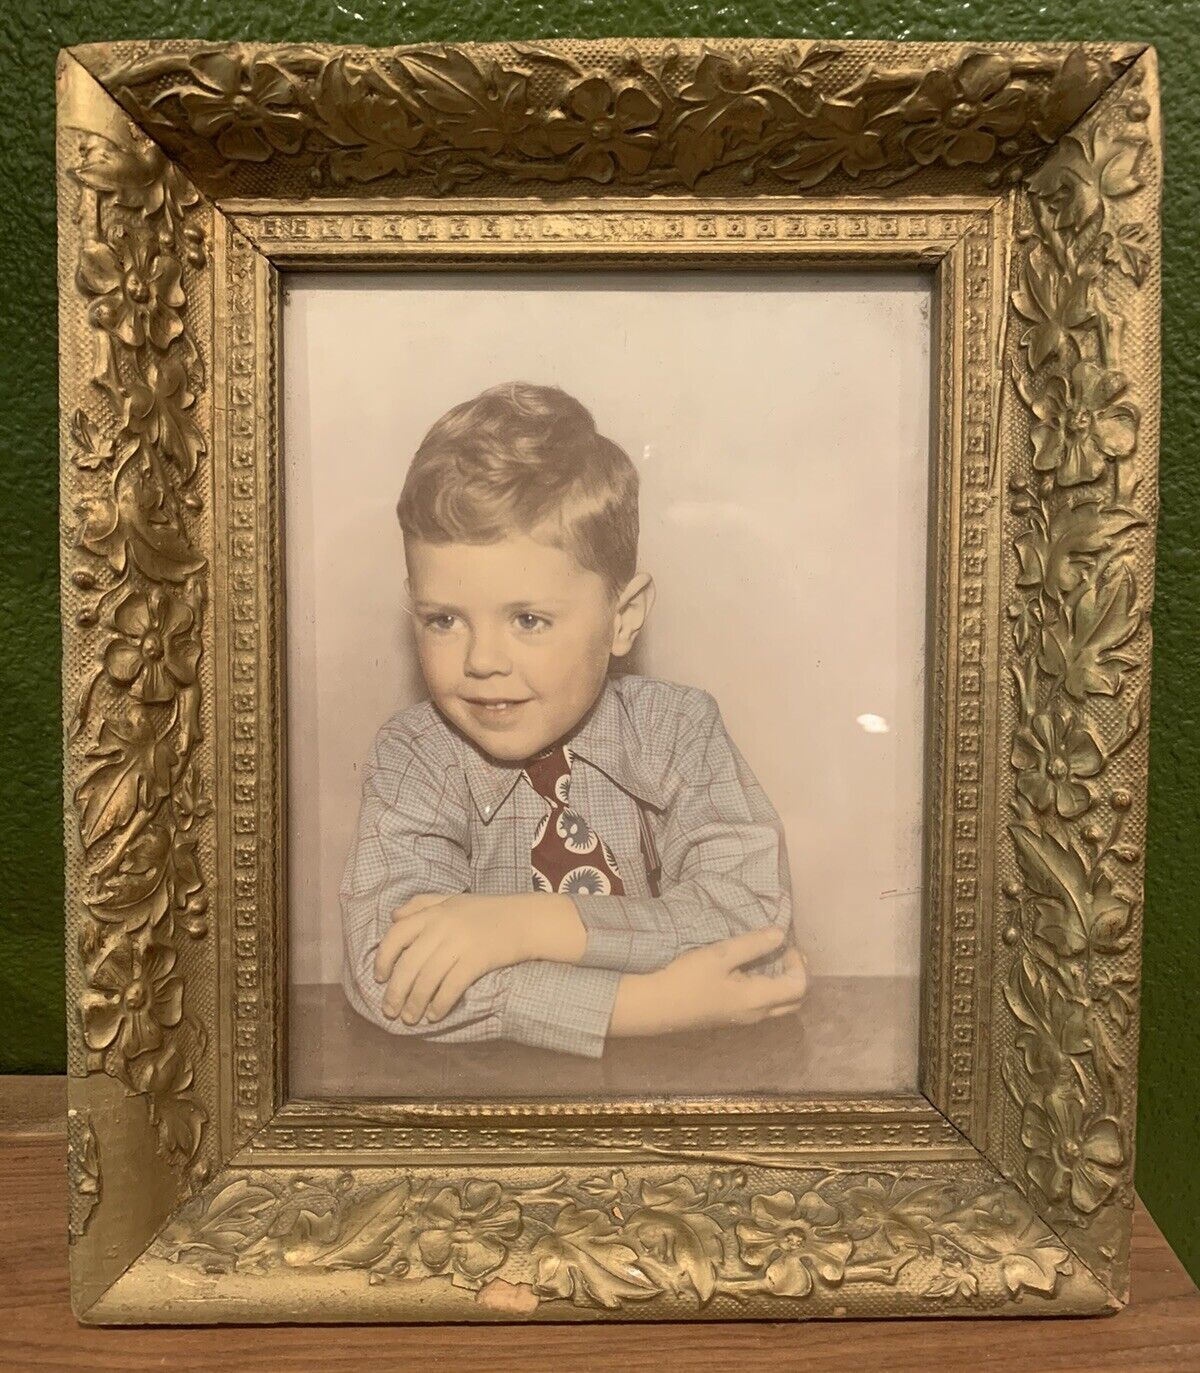 Vintage Gold Floral Gesso Picture Frame For 7.5 By 9.5 Inch Photograph Boy 40s